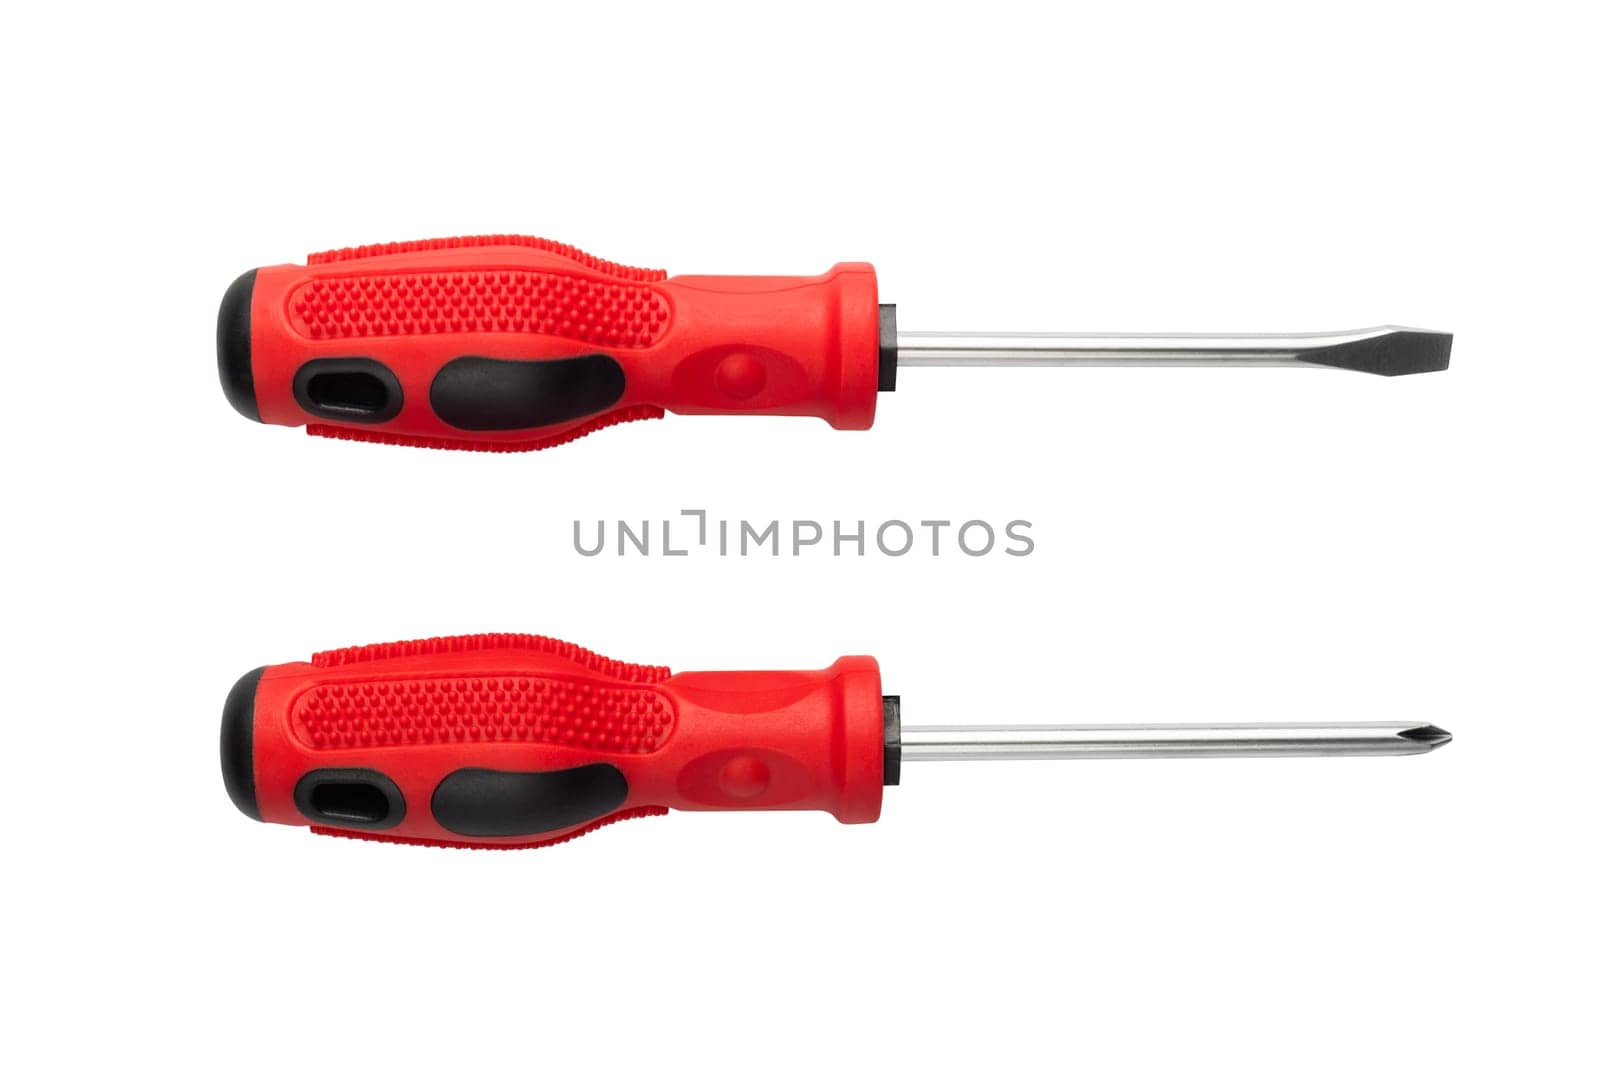 Pair of red and black screwdrivers isolated on white background. Professional tools concept. Design for catalog, hardware store advertisement.